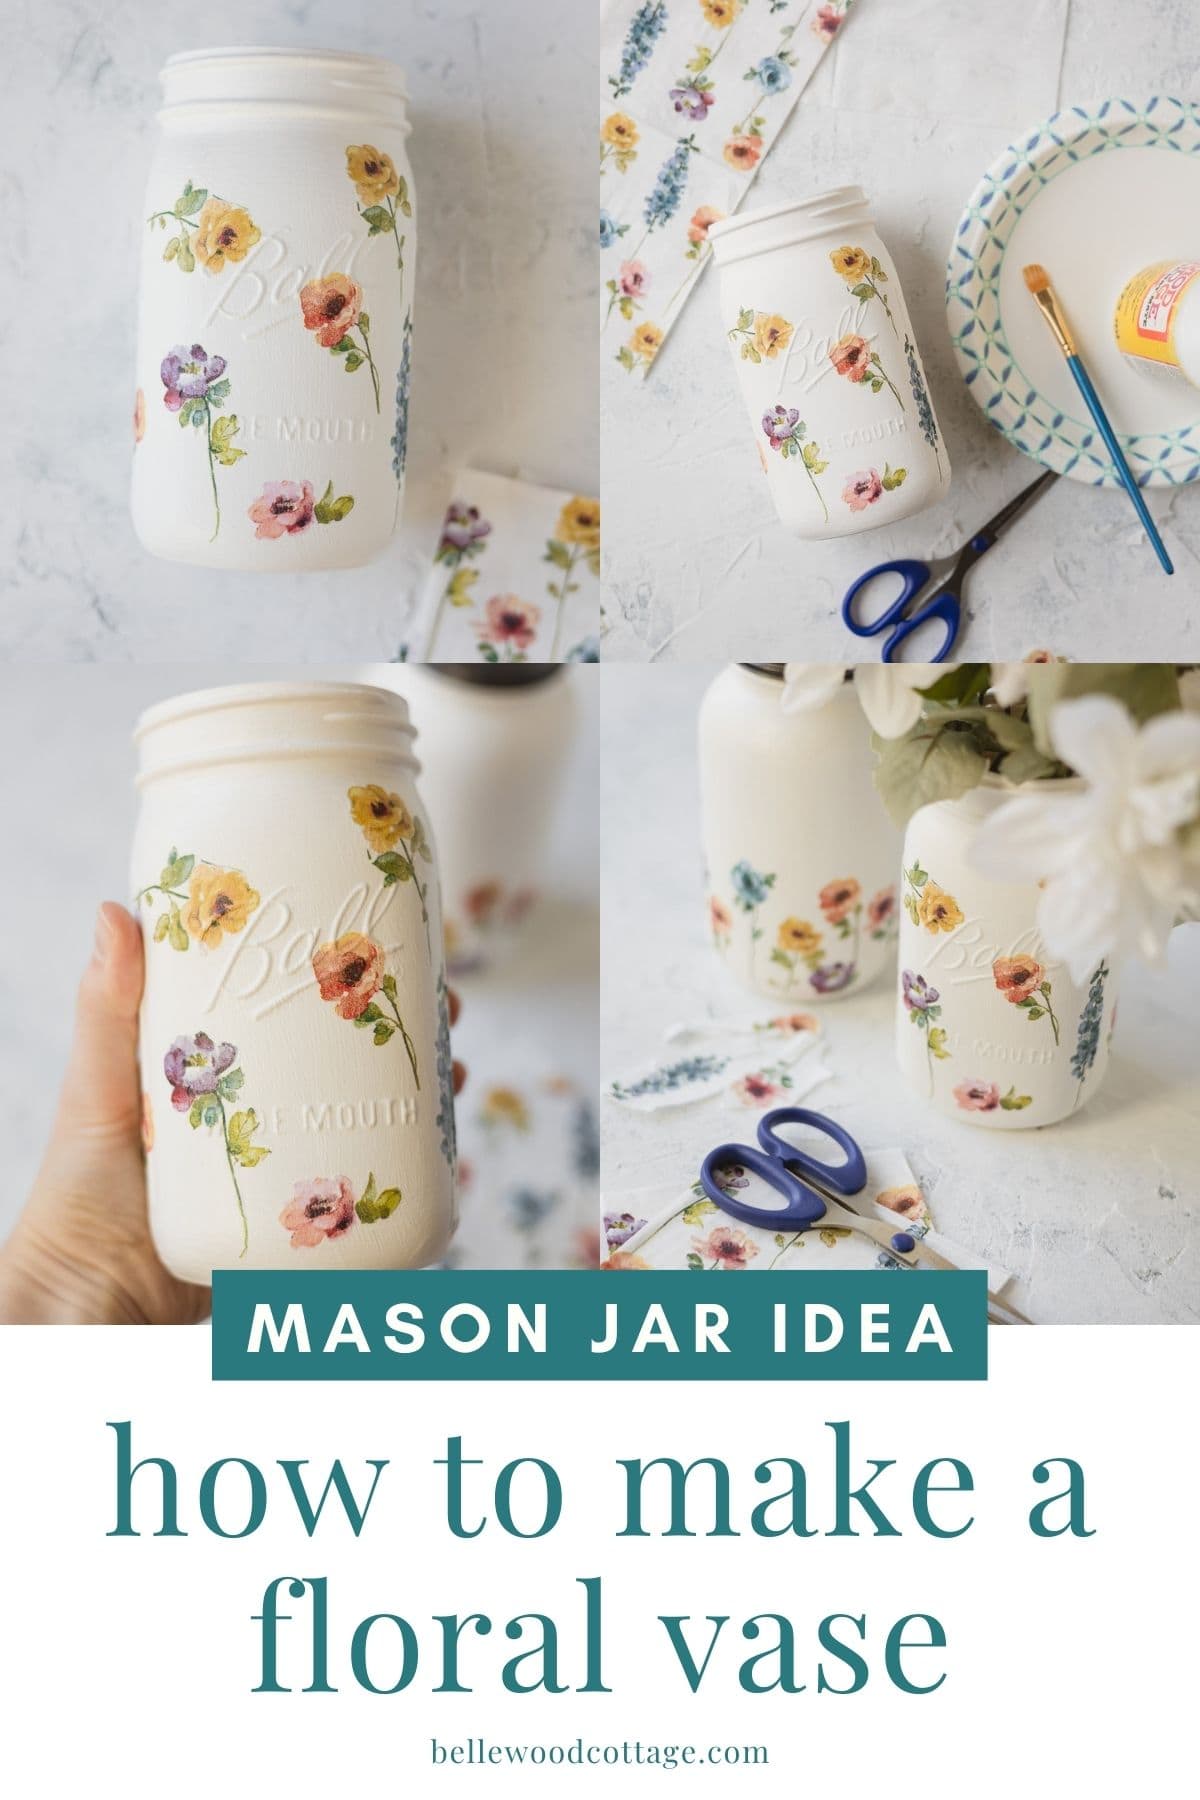 Step-by-step images of a floral mason jar craft with the words, "Mason Jar Idea: how to make a floral vase".